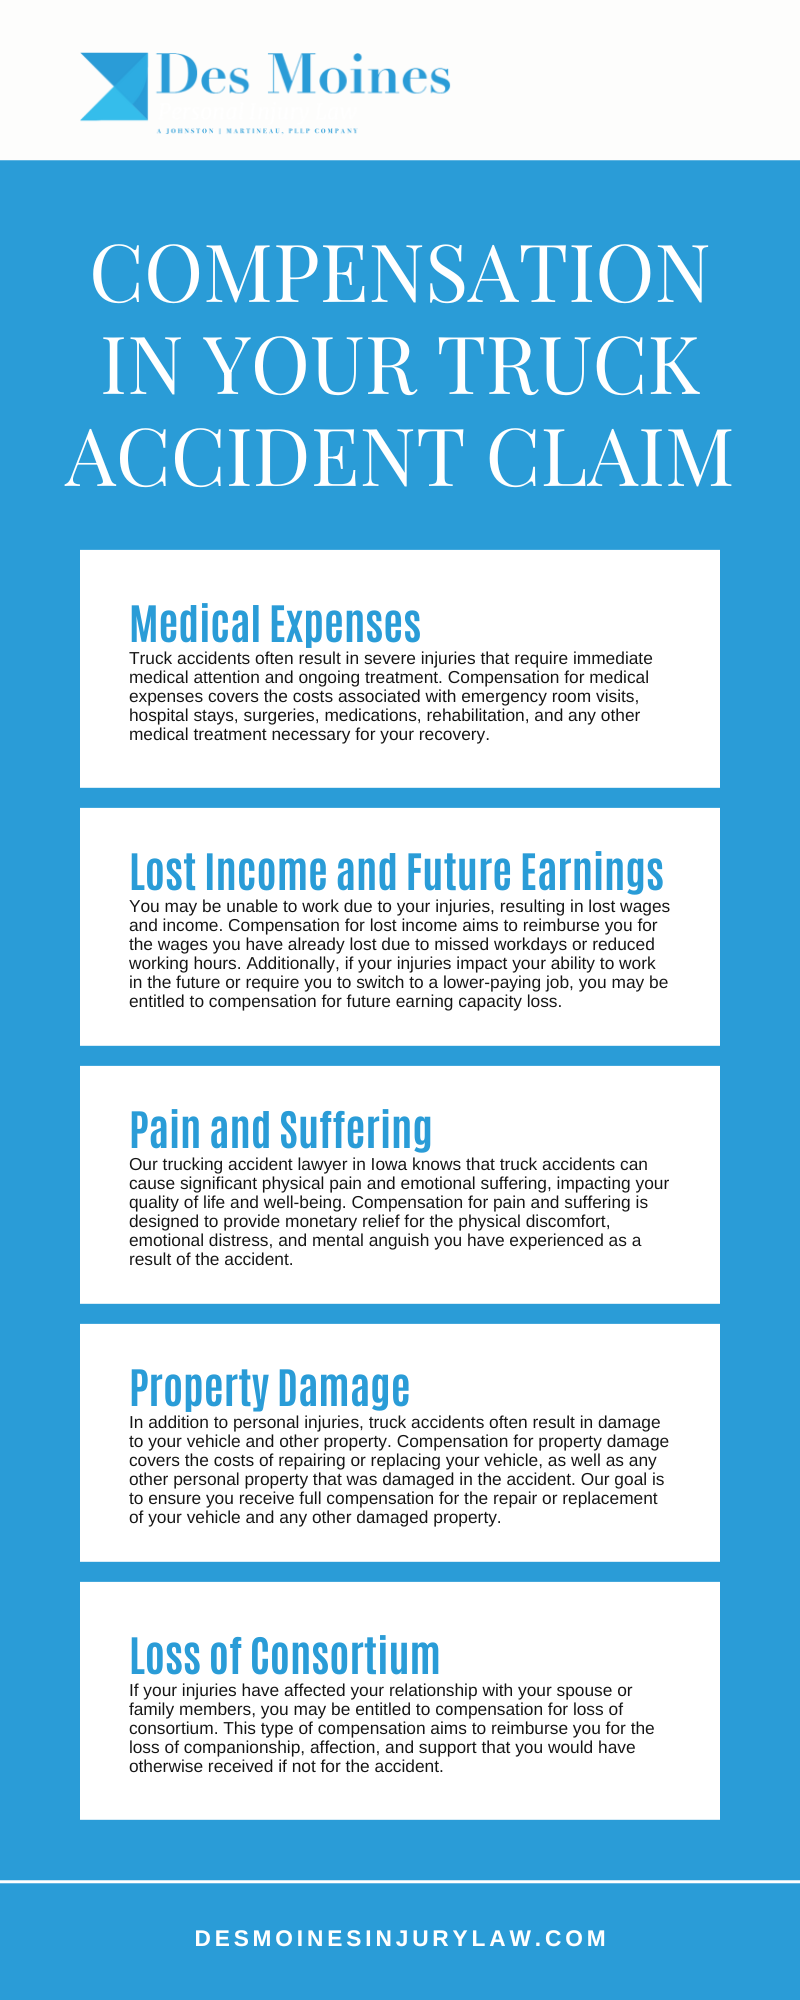 Compensation In Your Truck Accident Claim Infographic